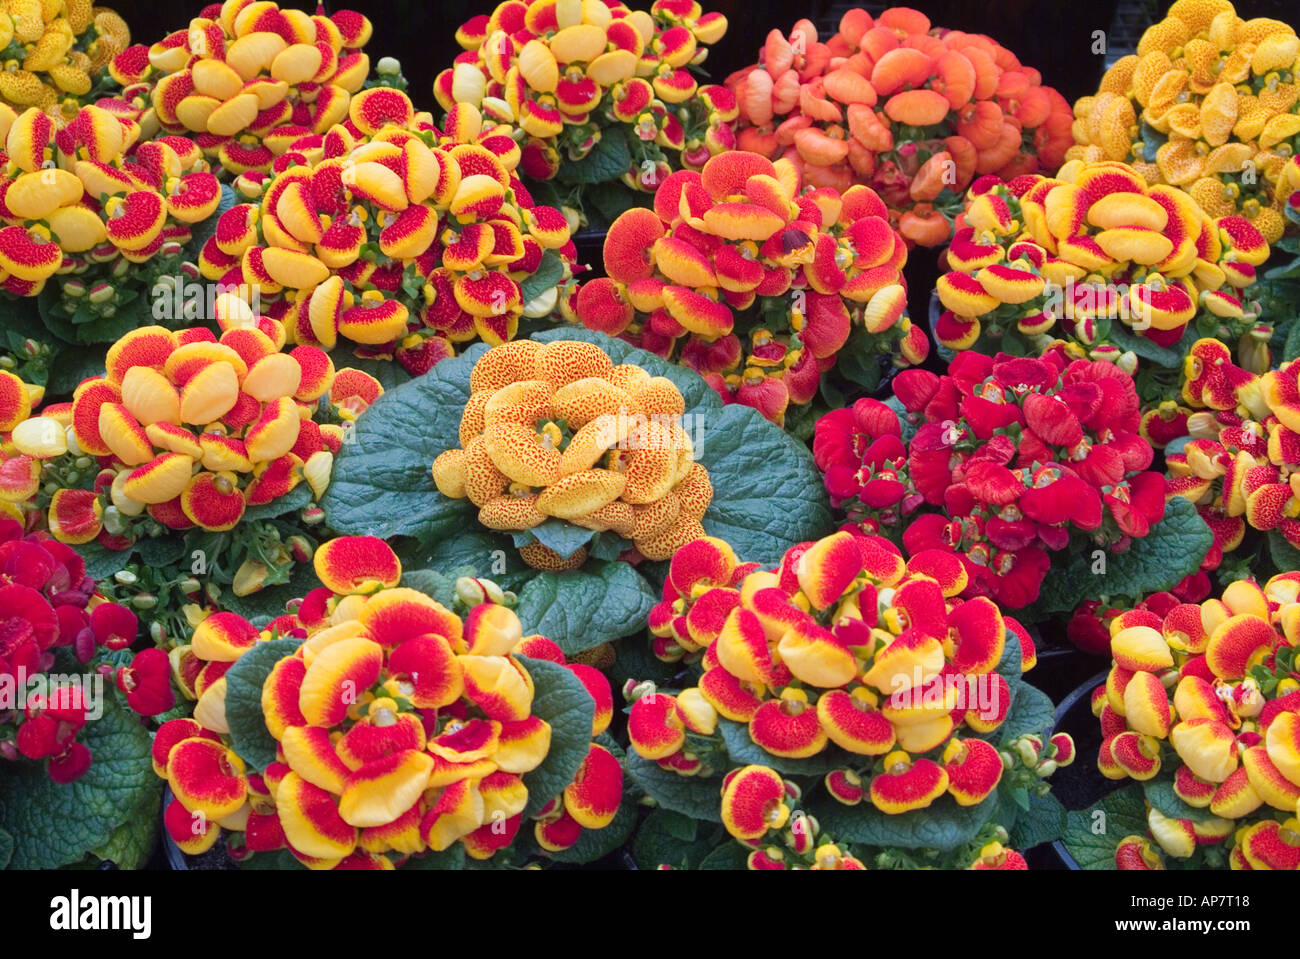 160 Calceolariaceae Royalty-Free Photos and Stock Images | Shutterstock